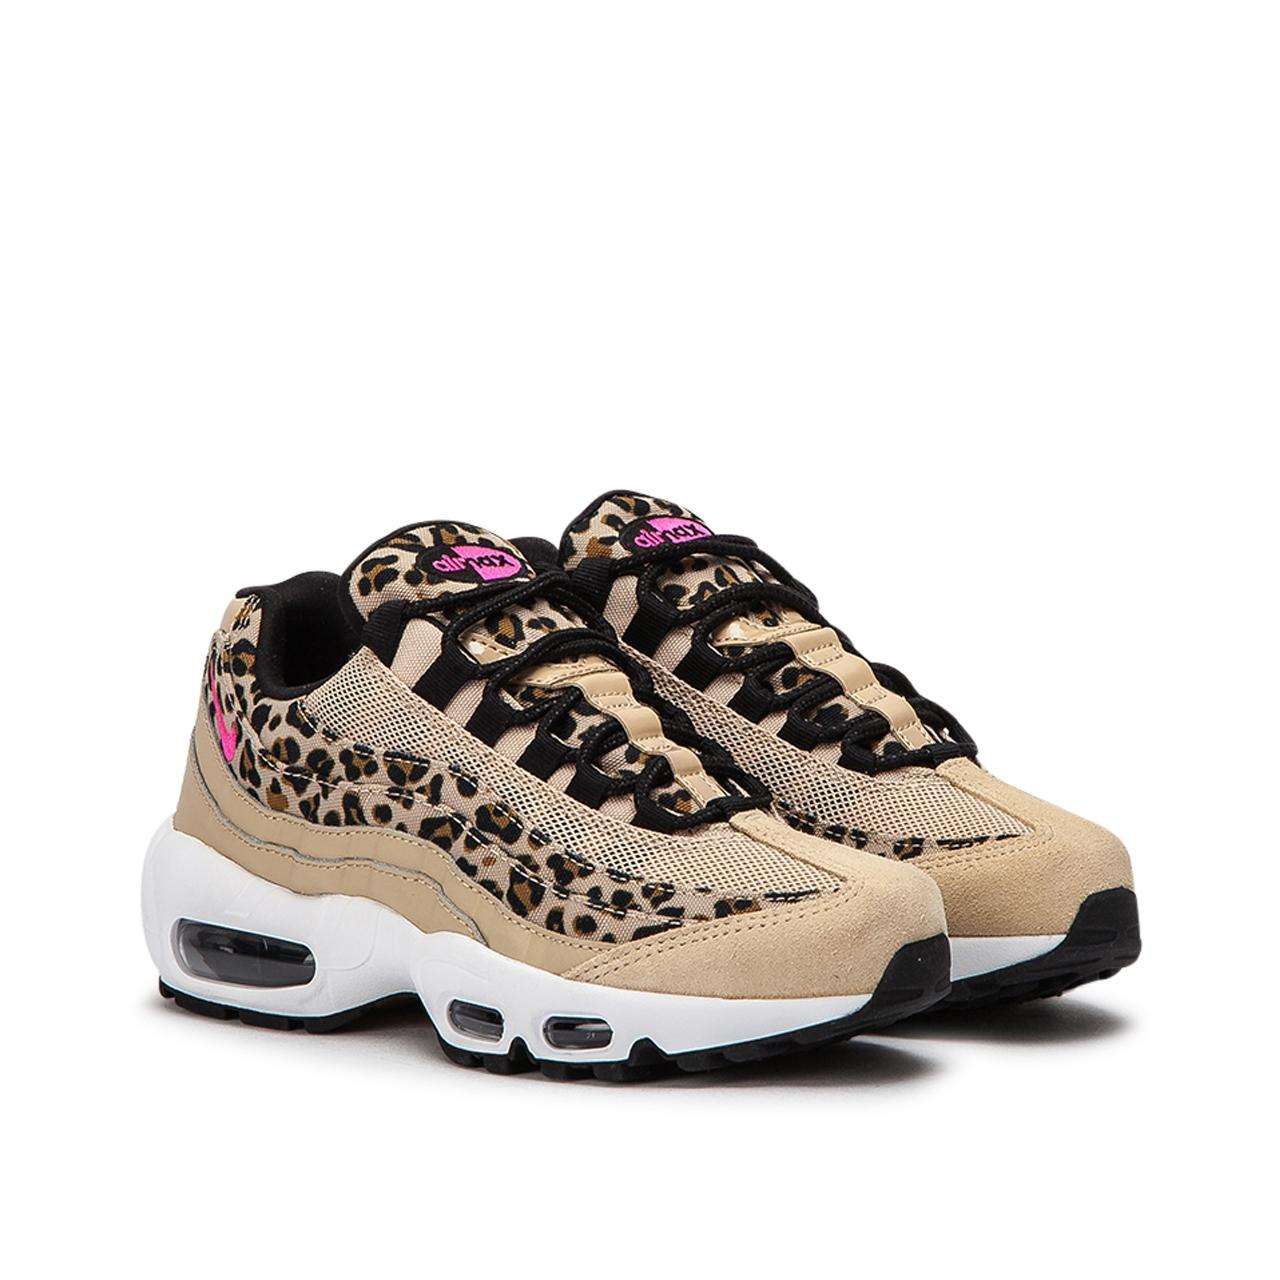 Nike Leather Nike Wmns Air Max 95 Prm 